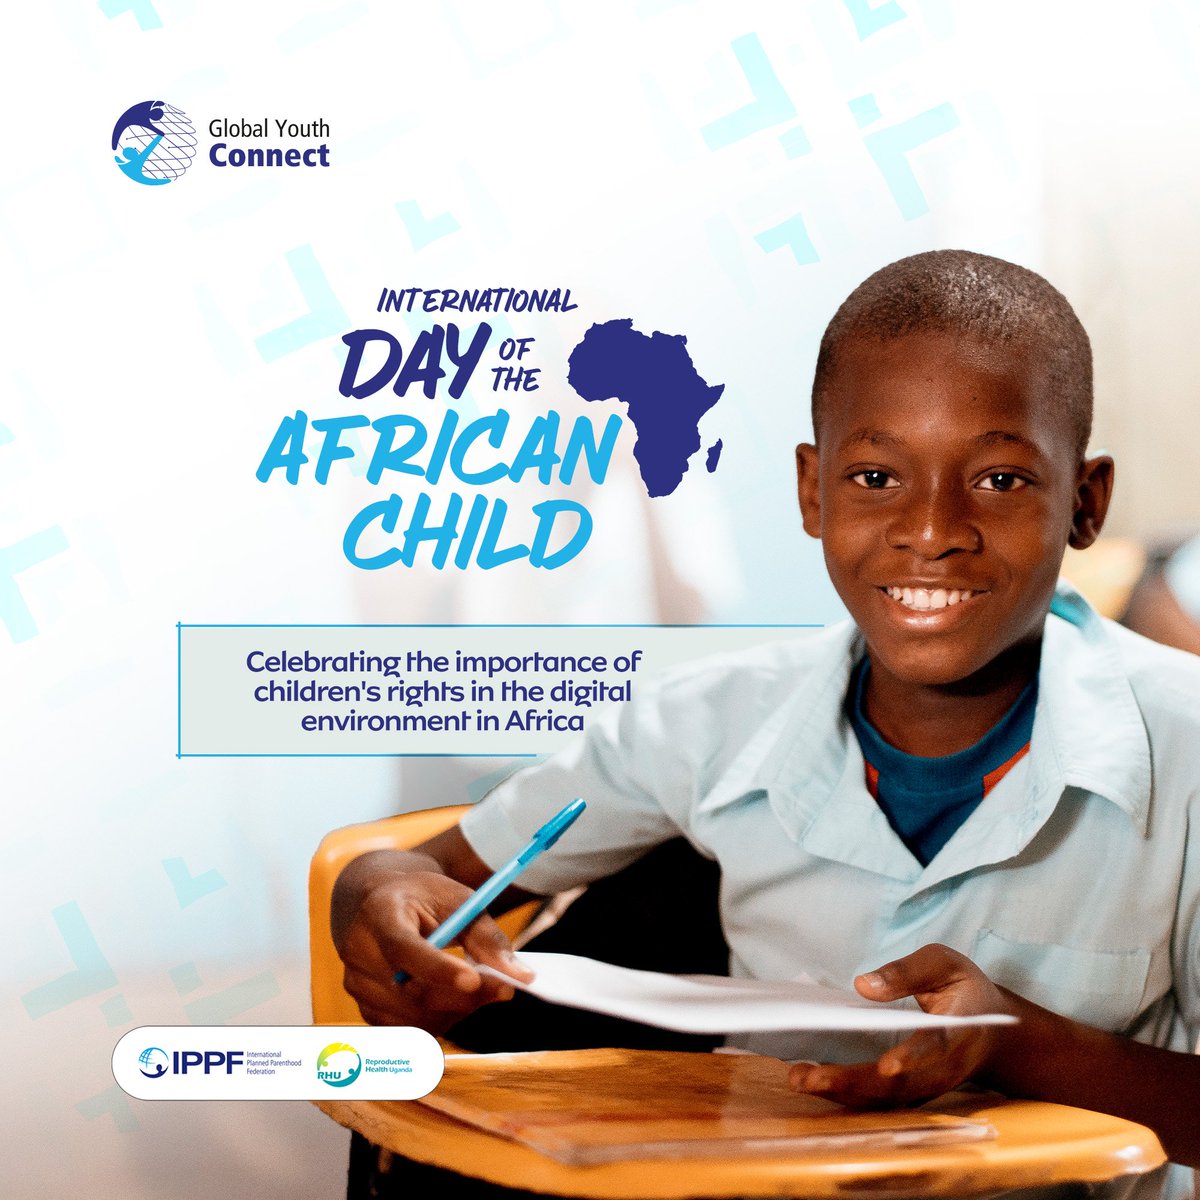 As an online platform, this year, we choose to celebrate the International Day of the African Child by emphasising the need to protect the rights of children in the different digital spaces.

How do you think we can achieve this goal?

#DayoftheAfricanChild|#DAC2023
#GYConnect